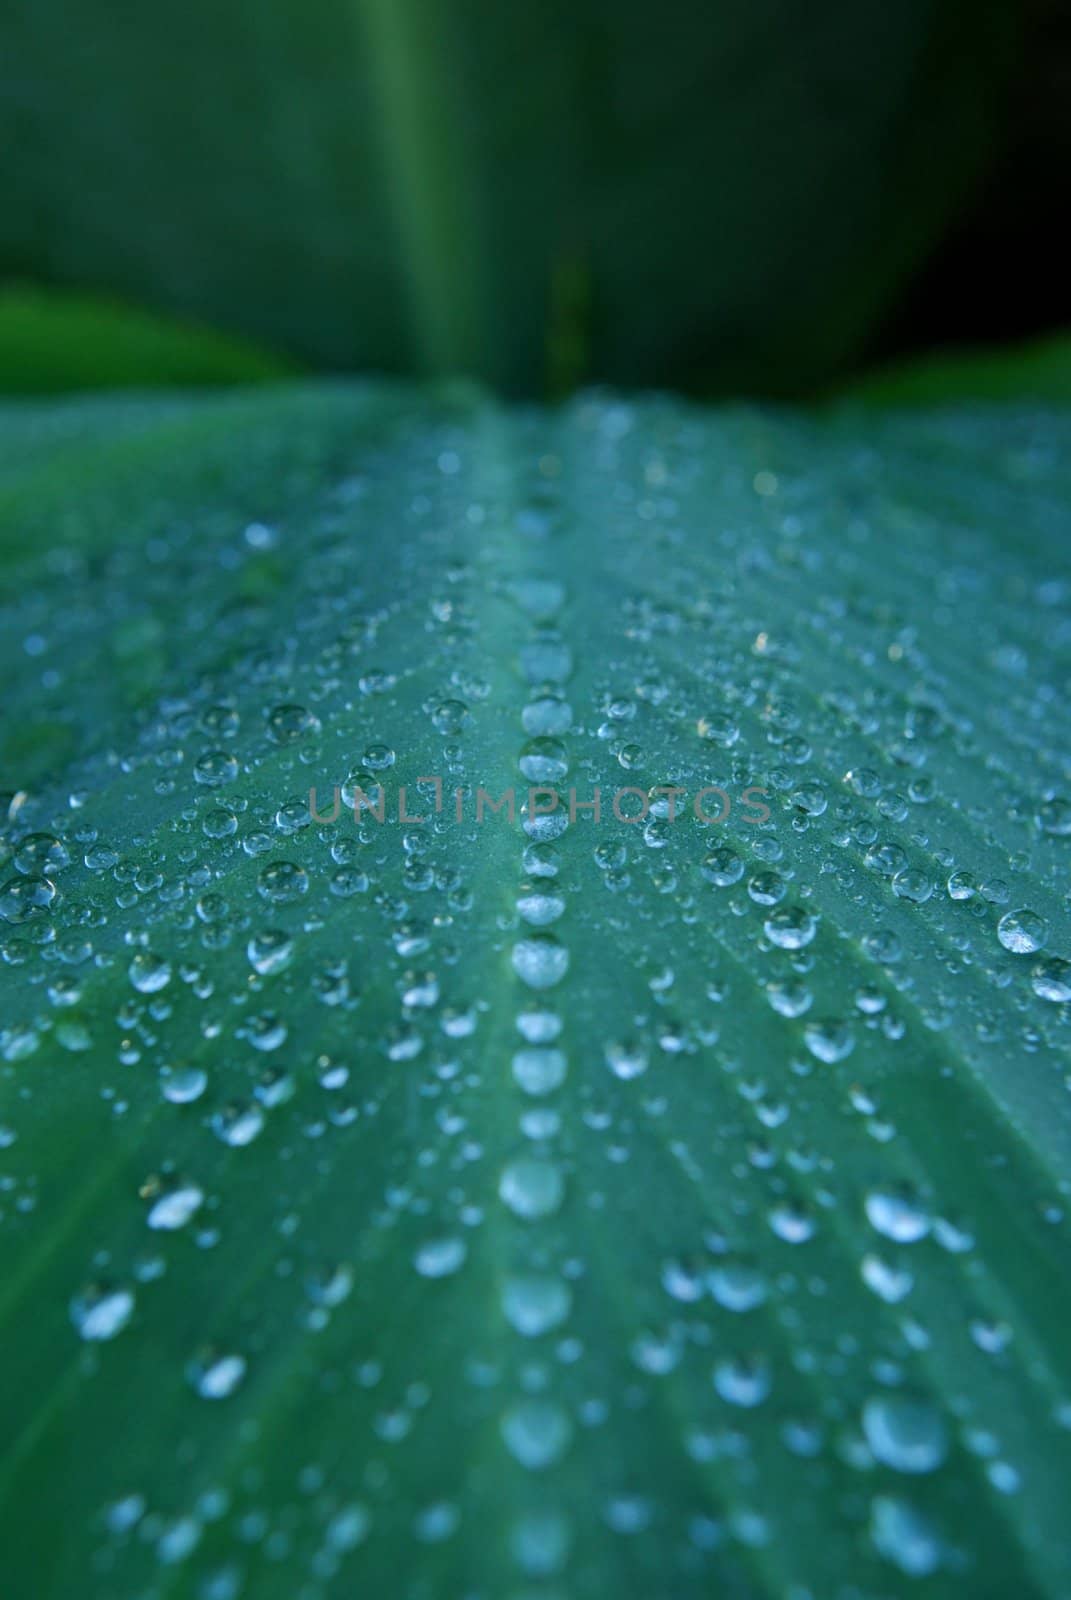 wet canililly leaf by chuckpee54